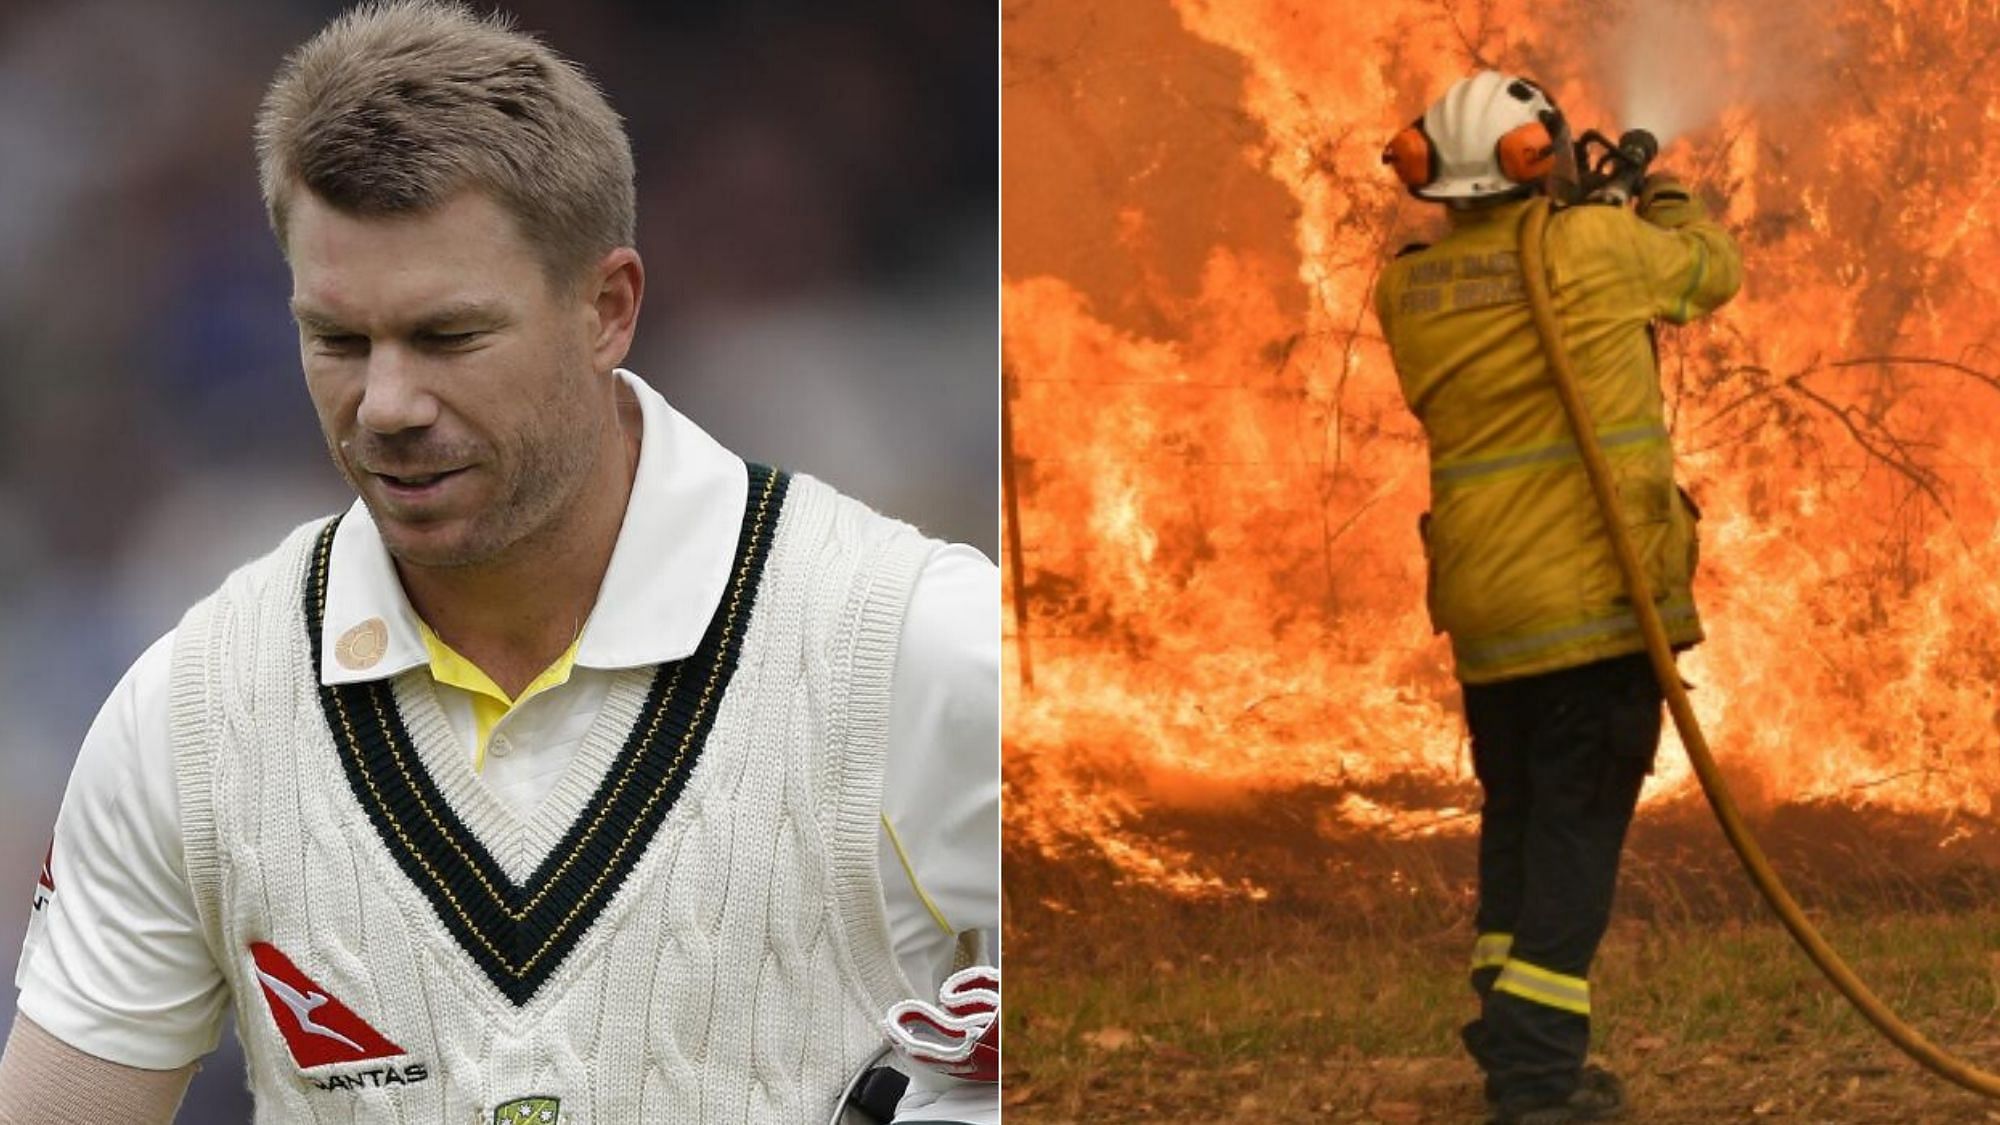 Australia opener David Warner on Thursday, 2 January hailed the firefighters currently working day and night to douse the flames of the devastating bushfires, saying they are the real heroes.